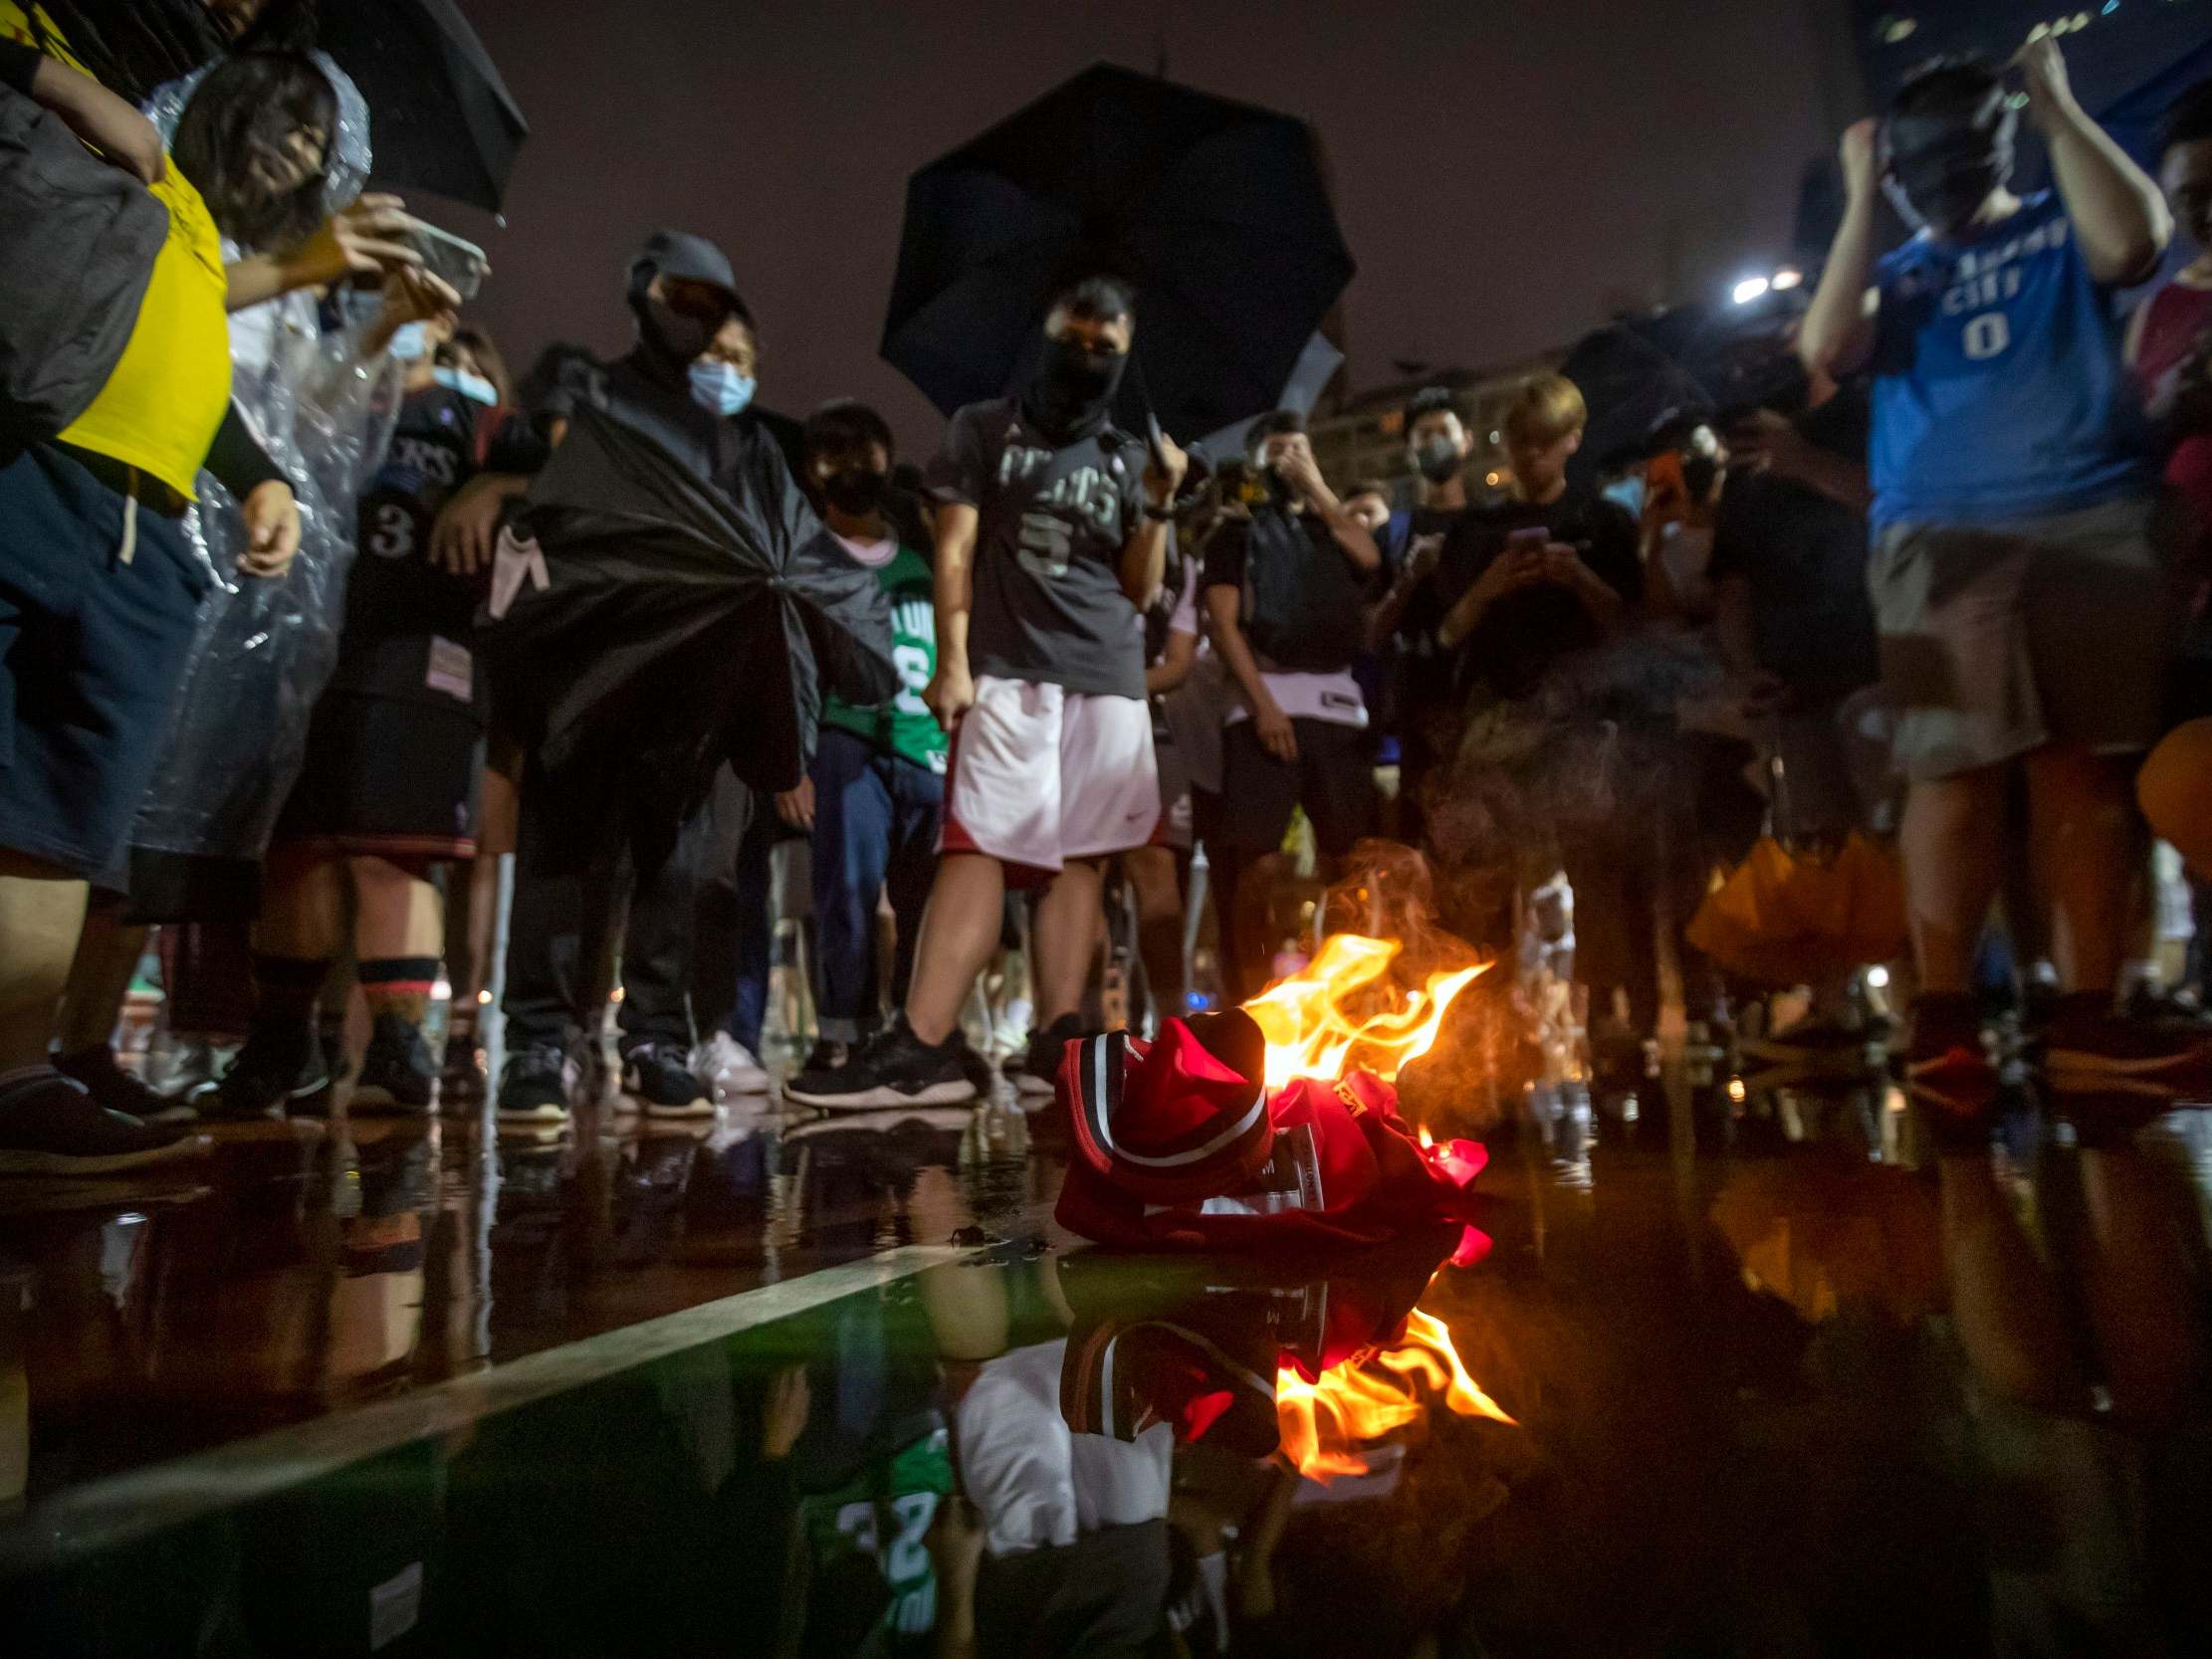 Demonstrators in Hong Kong burn a LeBron James basketball jersey in protest at his comments over free speech